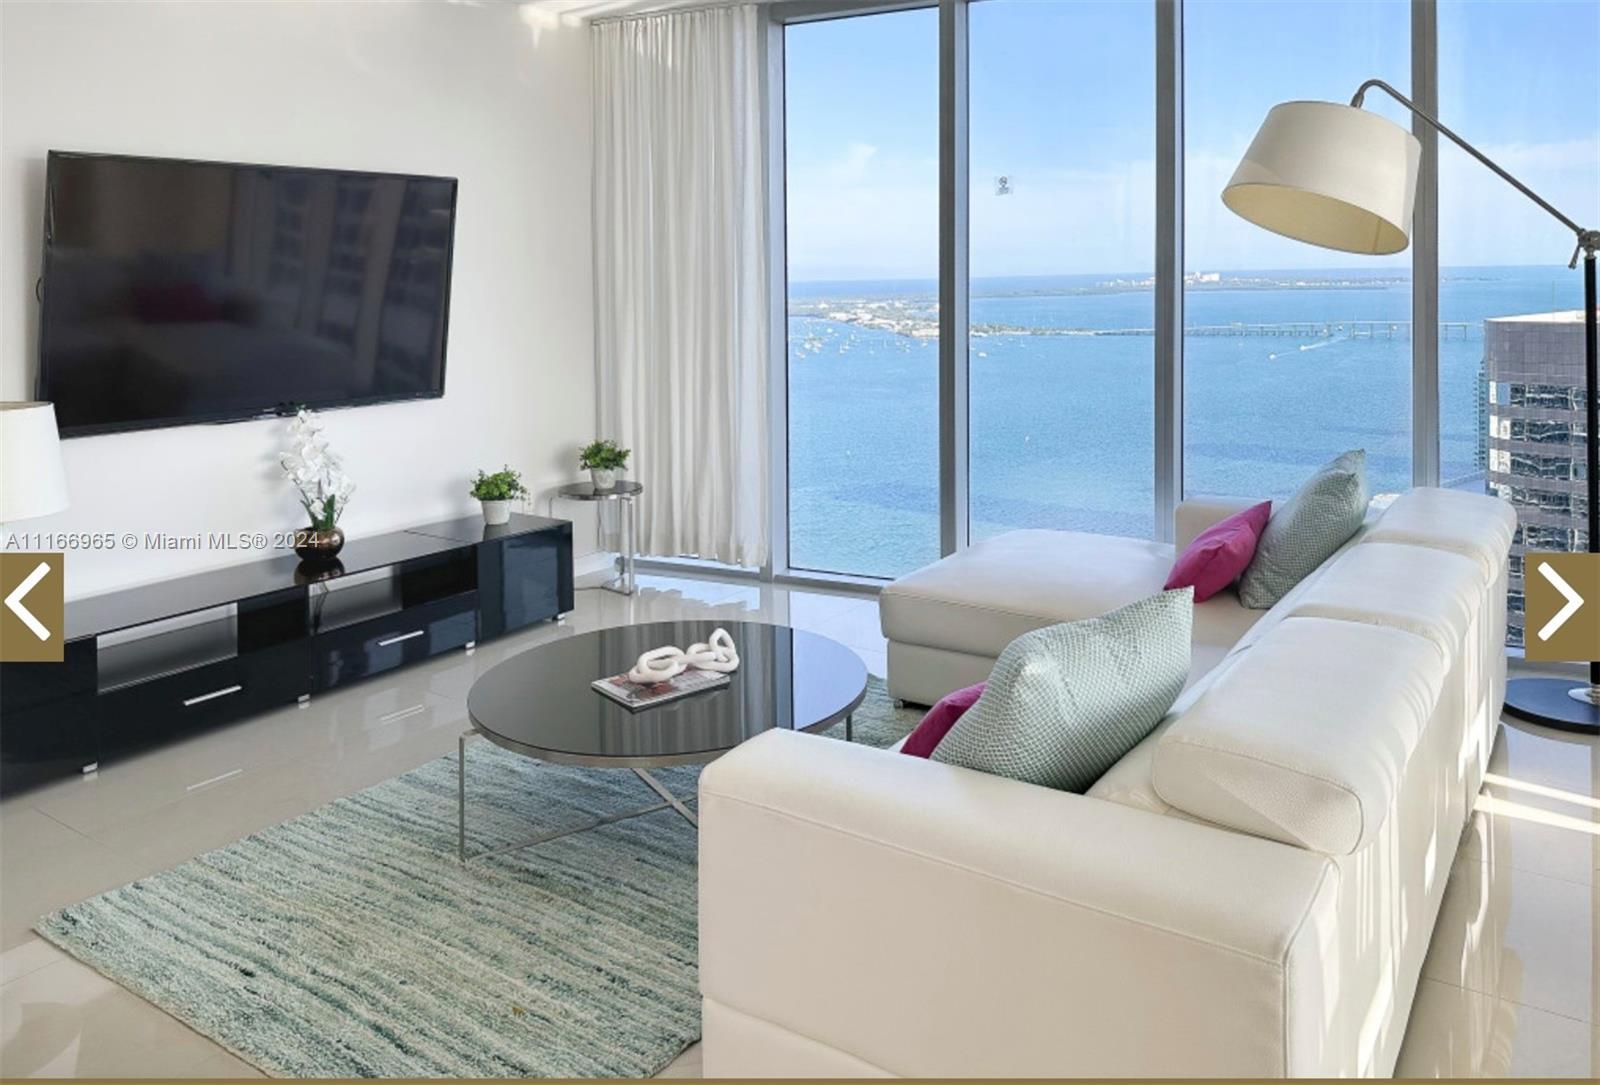 Enjoy amazing ocean views and the skyline of Miami. Fully furnished luxury equipped condo with floor to ceiling windows throughout. Resort-style amenities, including a 300-foot-long swimming pool, spa services at Icon Brickell Spa, showcasing a water lounge, steam room and sauna, state-of-the-art fitness center at FIT®, hot tub, game room, movie theater, café with poolside food and beverage service, 24-hour concierge service, and 24-hour valet parking service. Within Brickell’s prestigious financial district, walking distance to incredible Miami life including Brickell's top restaurants, bars, and shopping. Move in within 45 days of executed lease. Available for longterm and short term rental.